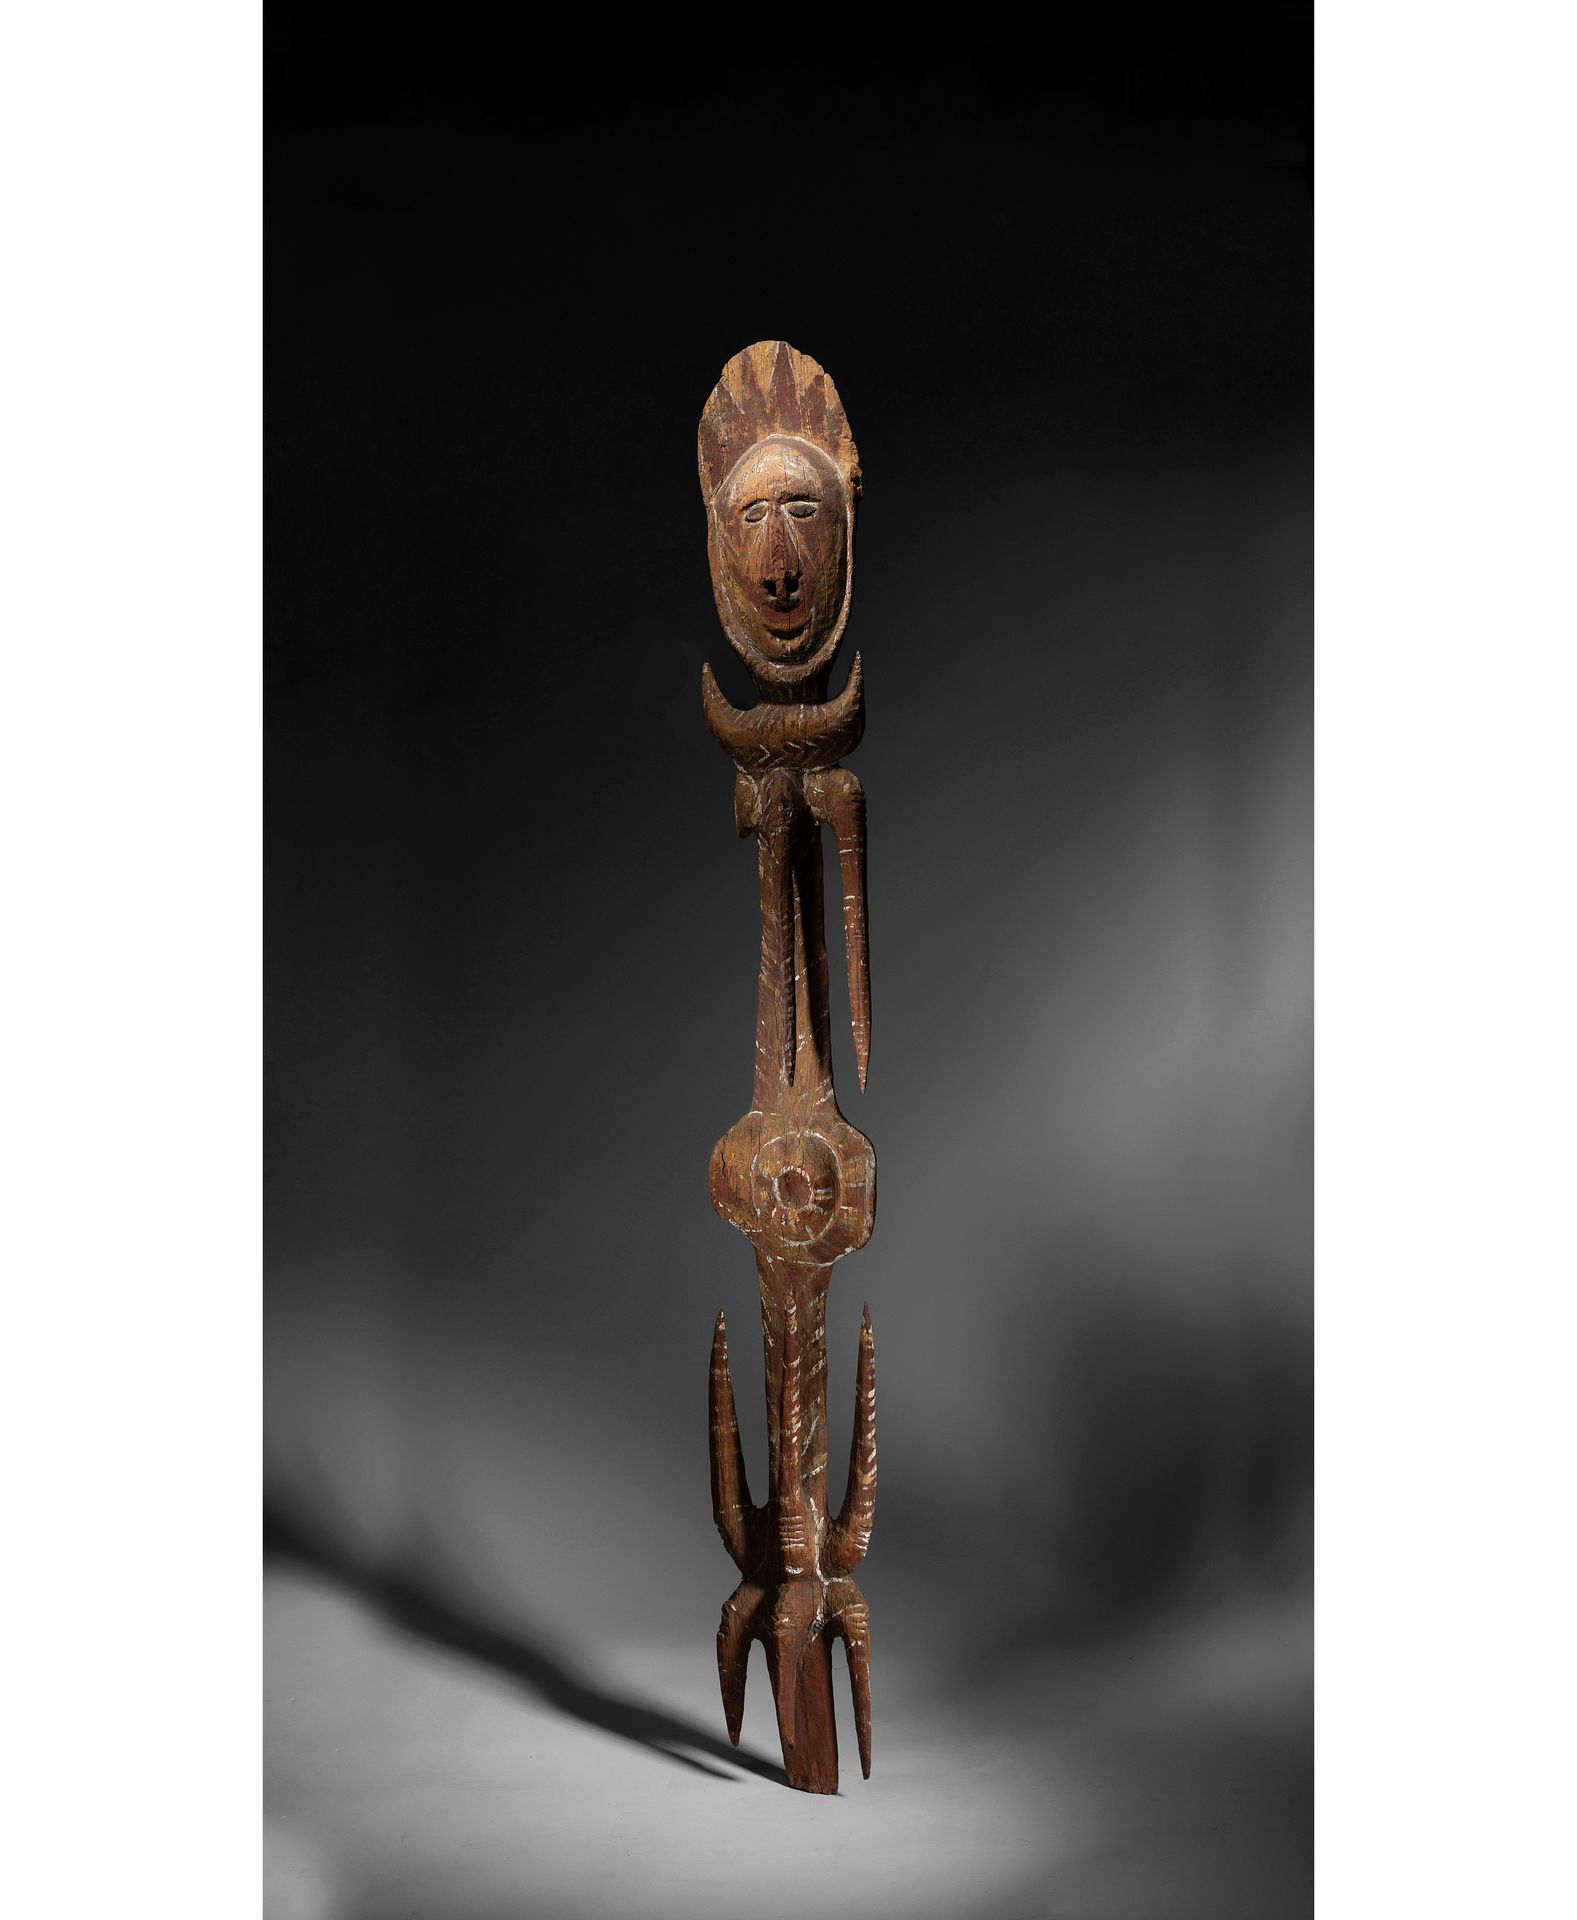 Null *An ancient hooked spirit figure, a "pre-contact" sculpture, with beautiful&hellip;